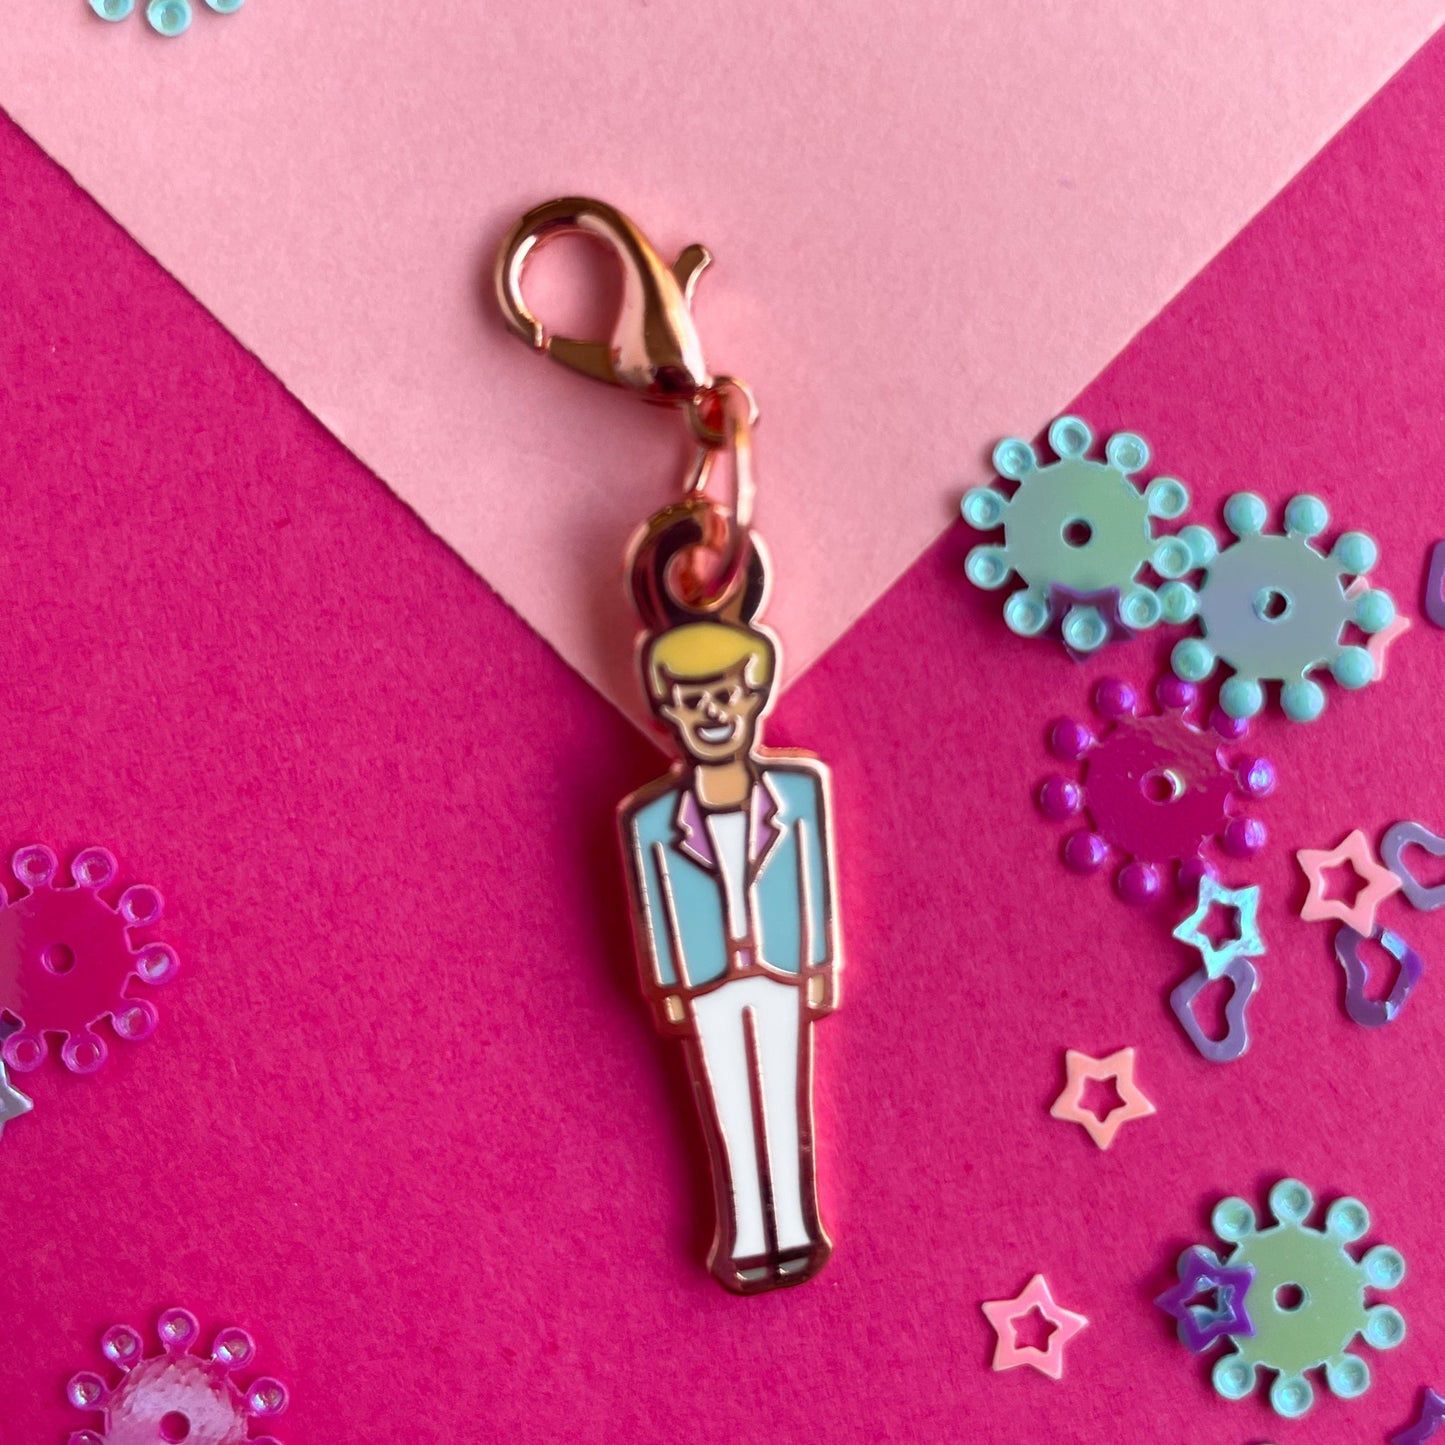 A lobster claw clasp charm shaped like a boy doll on a pink background.